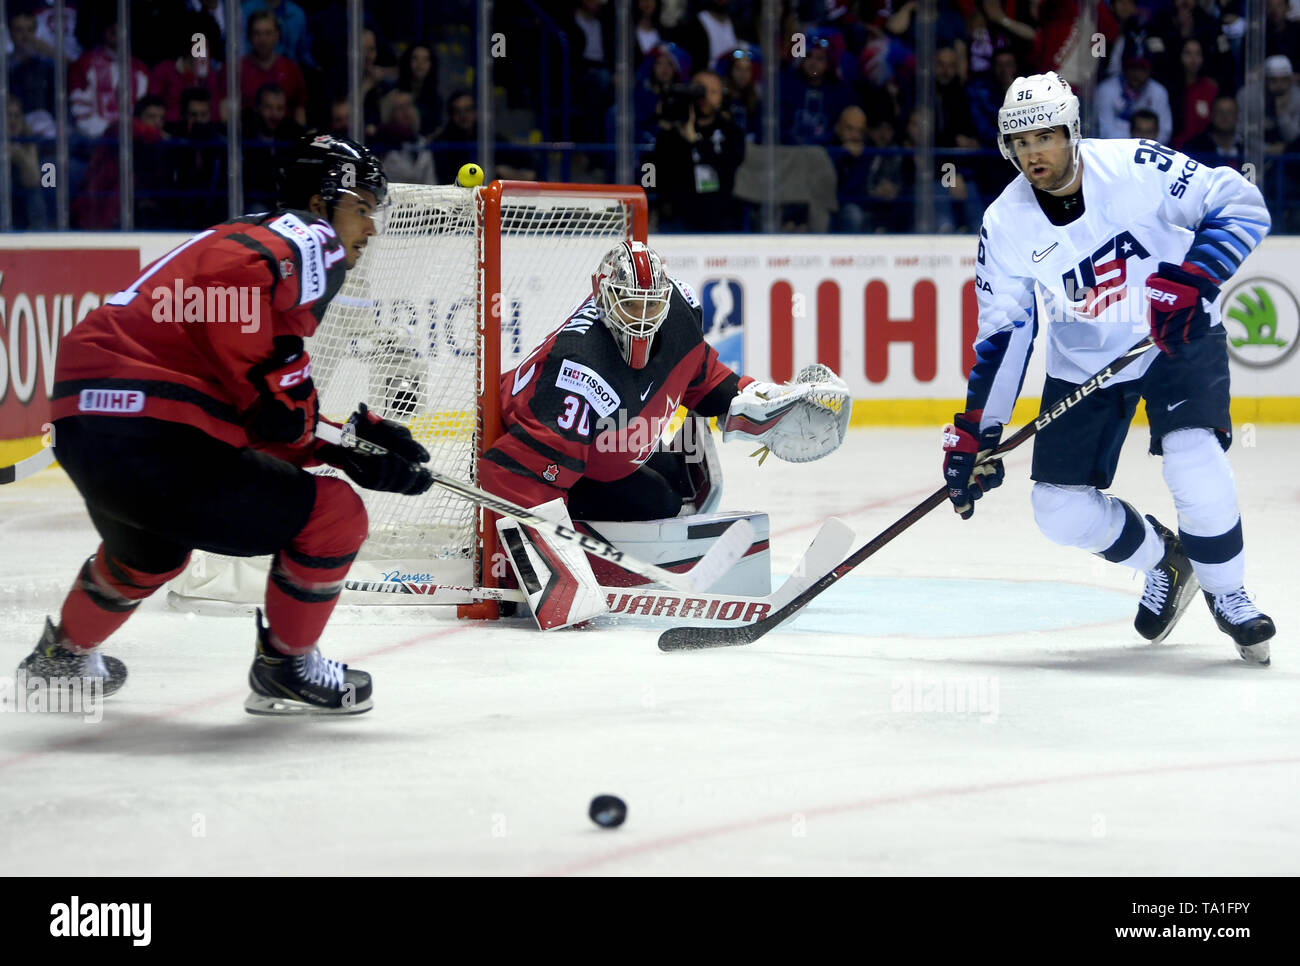 DeBrincat scores twice as US routs Denmark at worlds